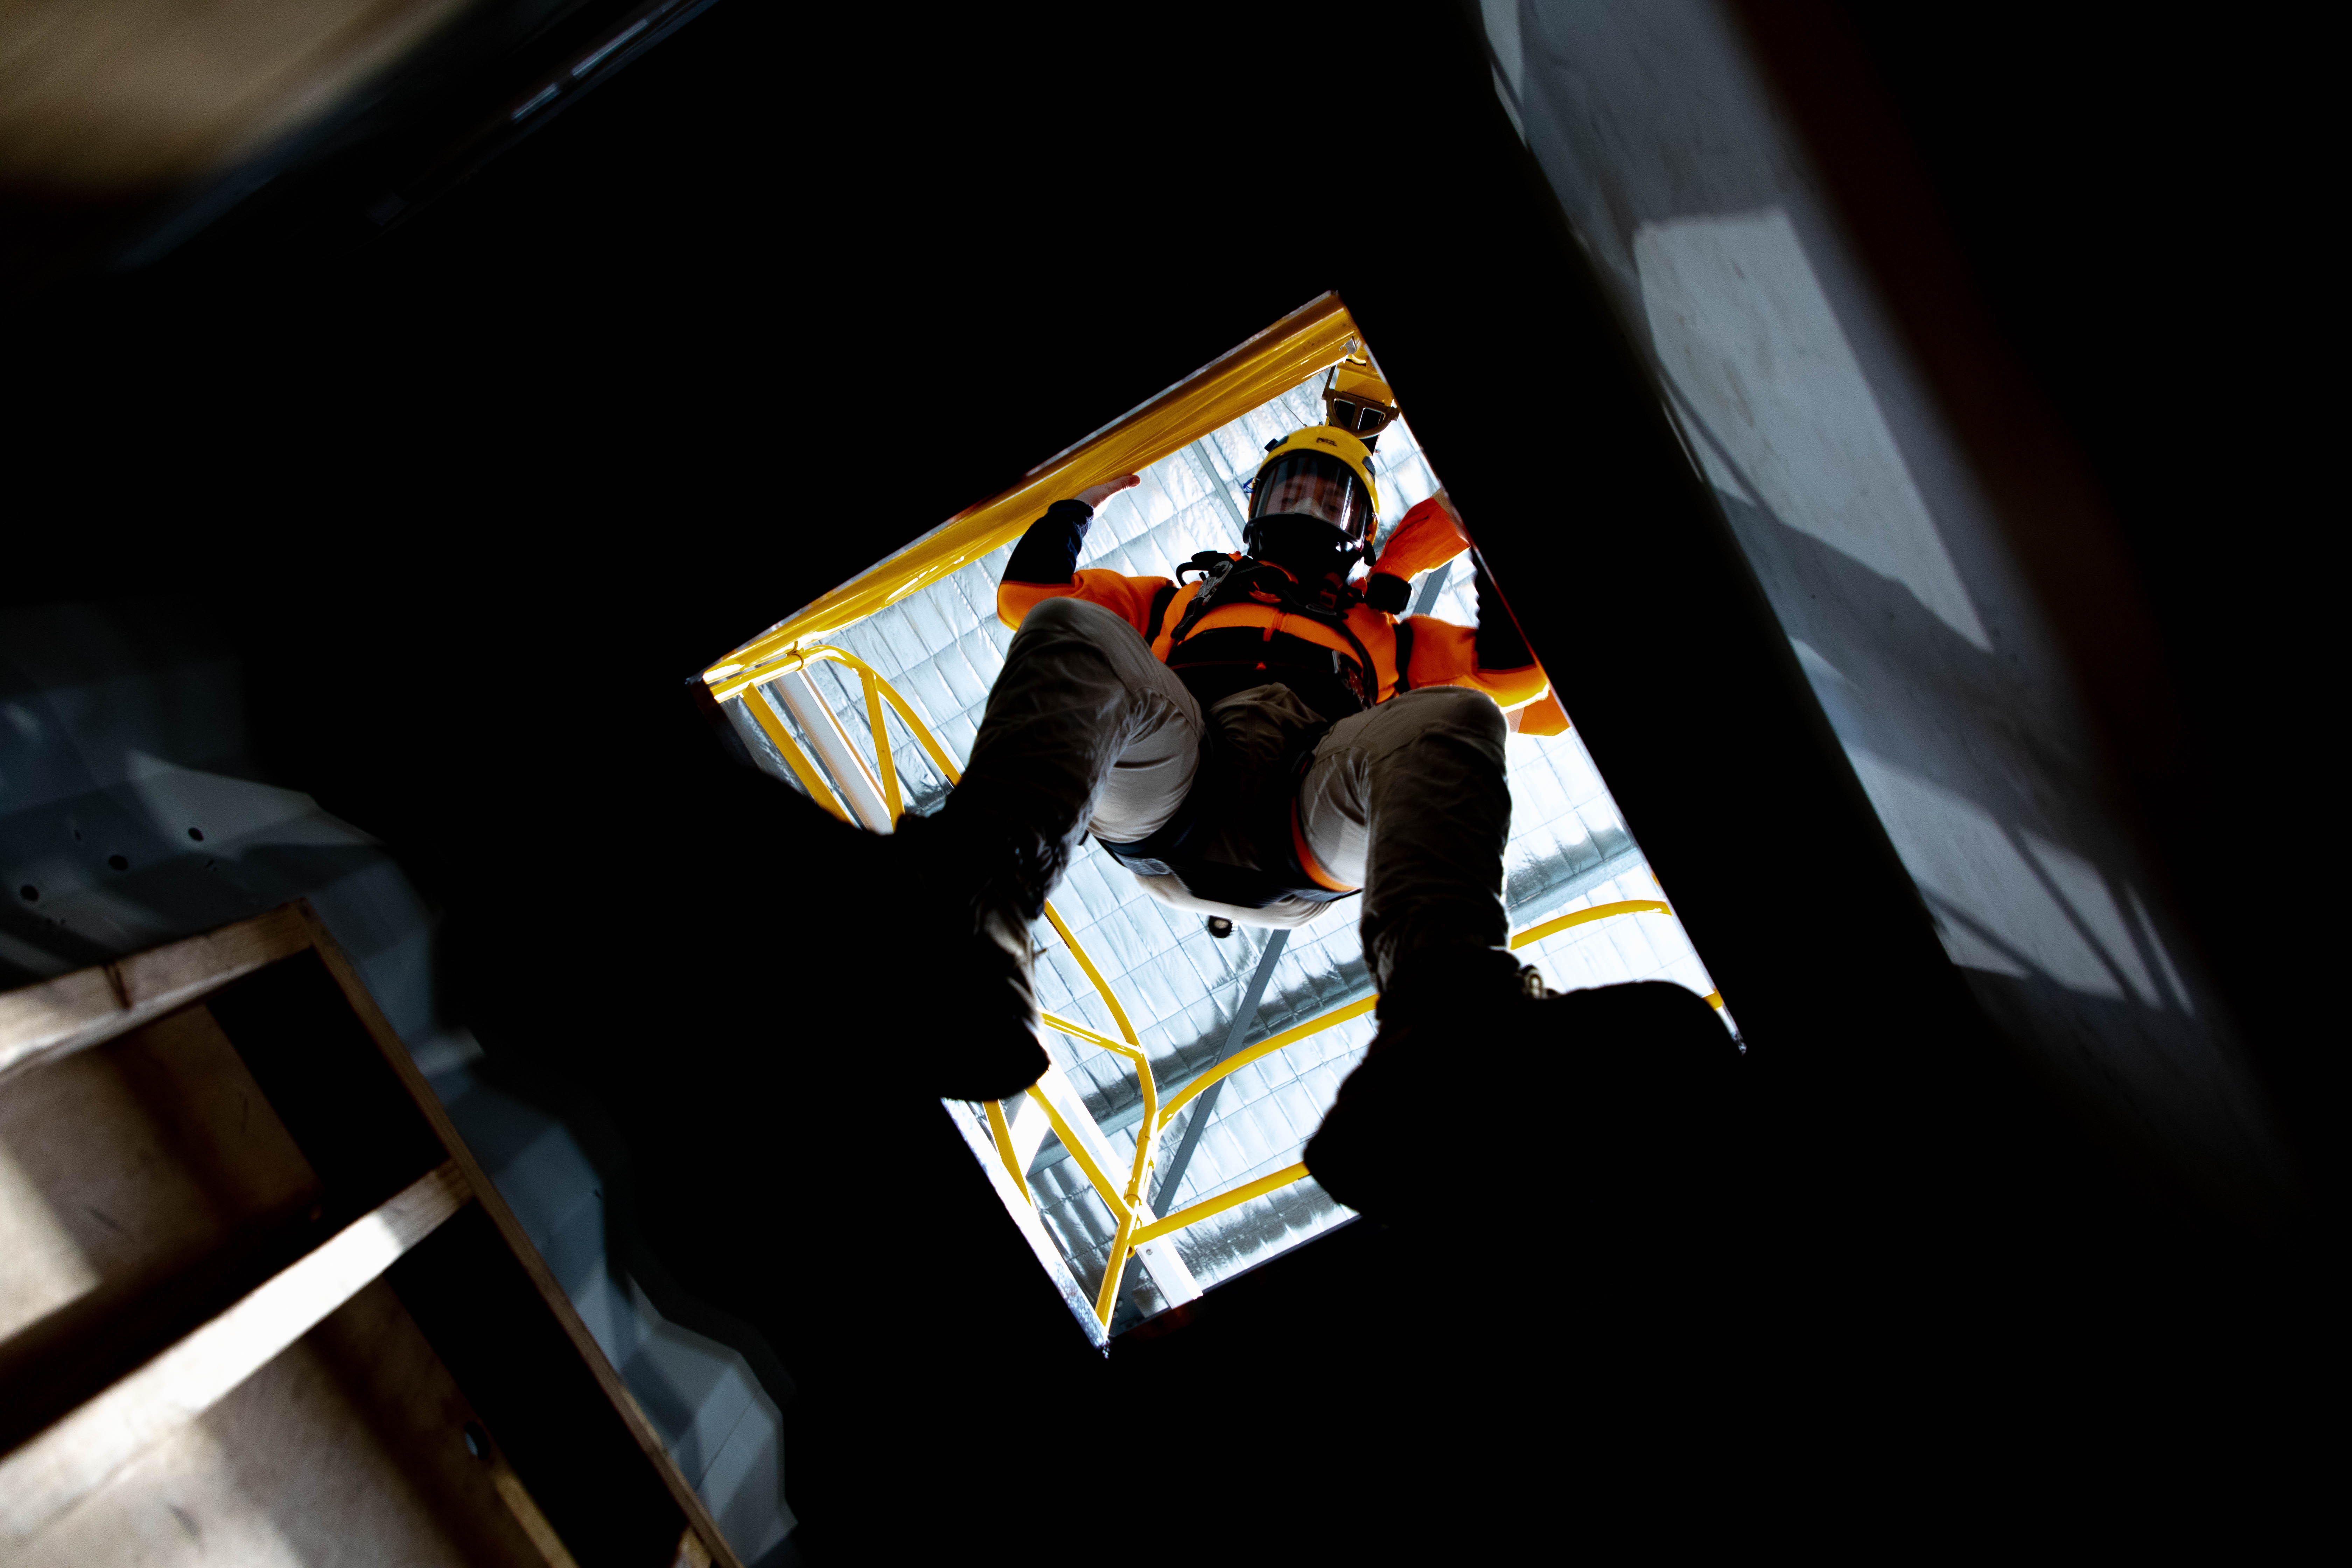 The risks of working in confined spaces and how to mitigate these risks